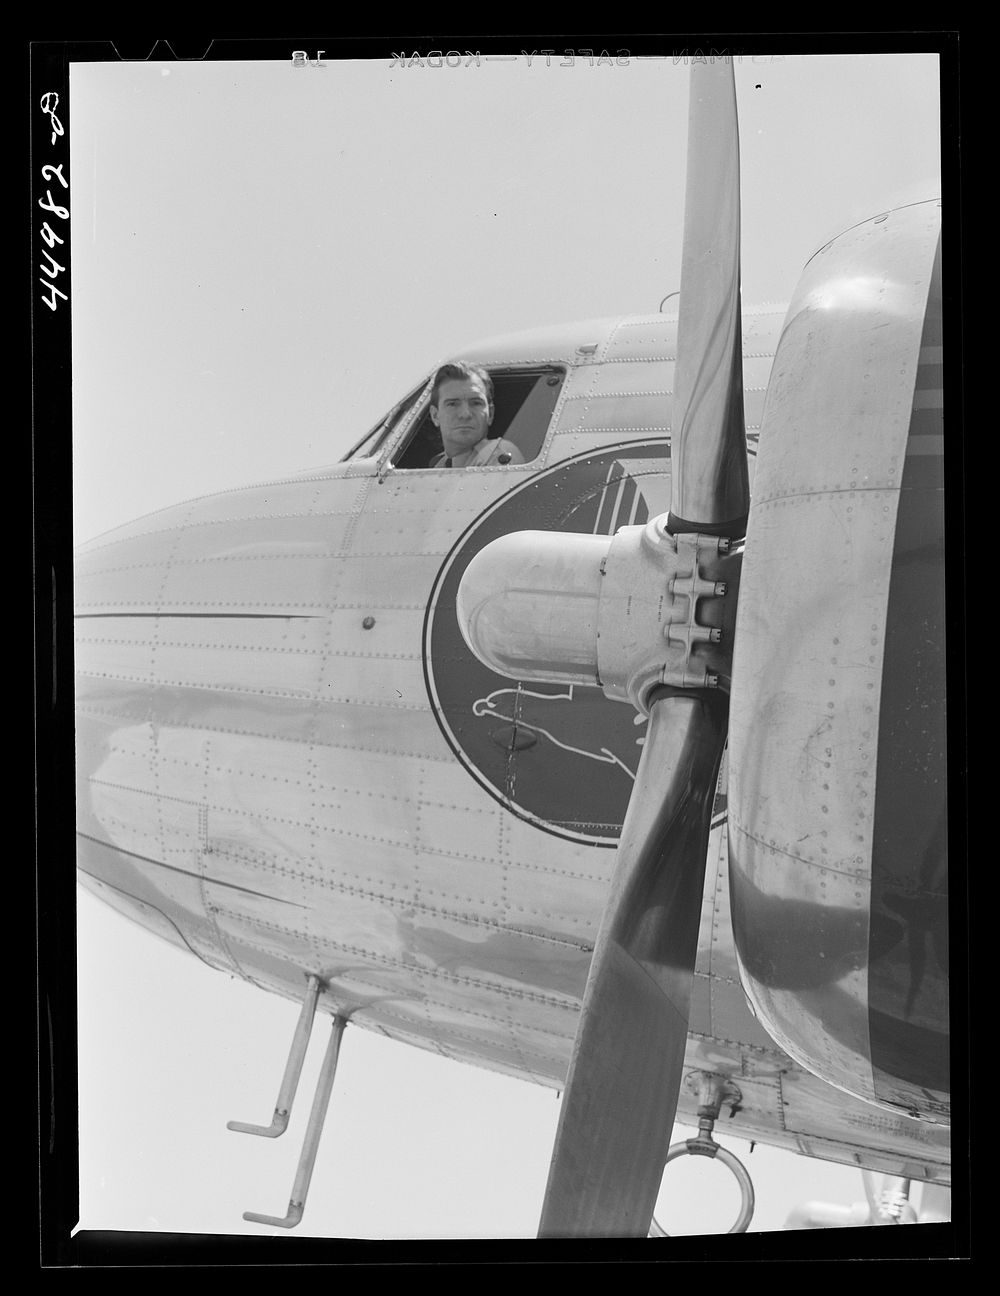 [Untitled photo, possibly related to: Waiting for instructions to take off. Washington D.C. municipal airport]. Sourced from…